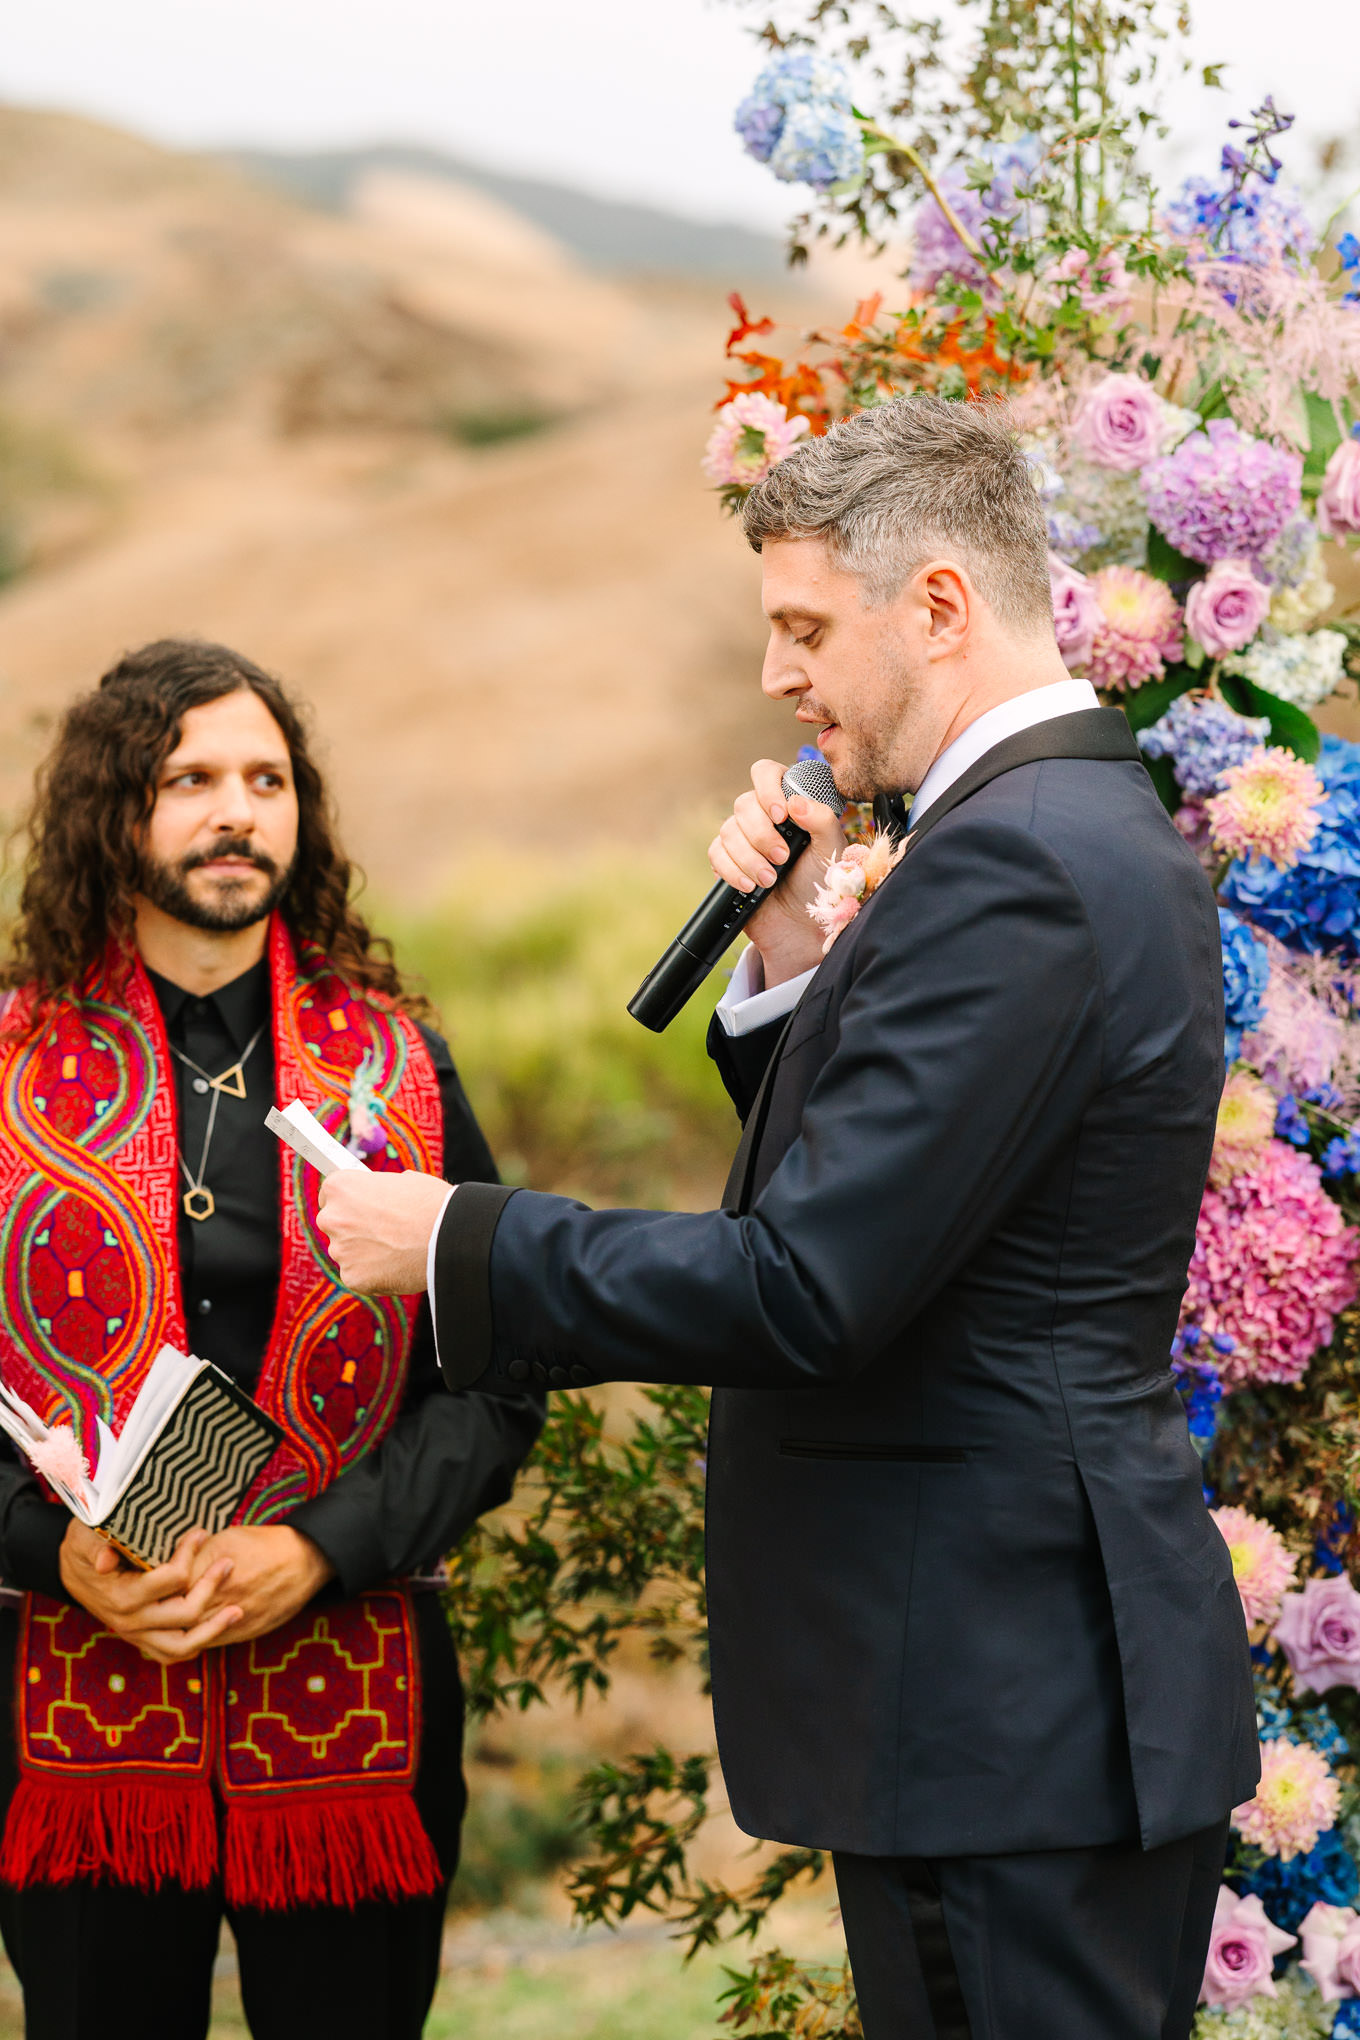 Groom reading wedding vows | Colorful and quirky wedding at Higuera Ranch in San Luis Obispo | #sanluisobispowedding #californiawedding #higueraranch #madonnainn   
Source: Mary Costa Photography | Los Angeles